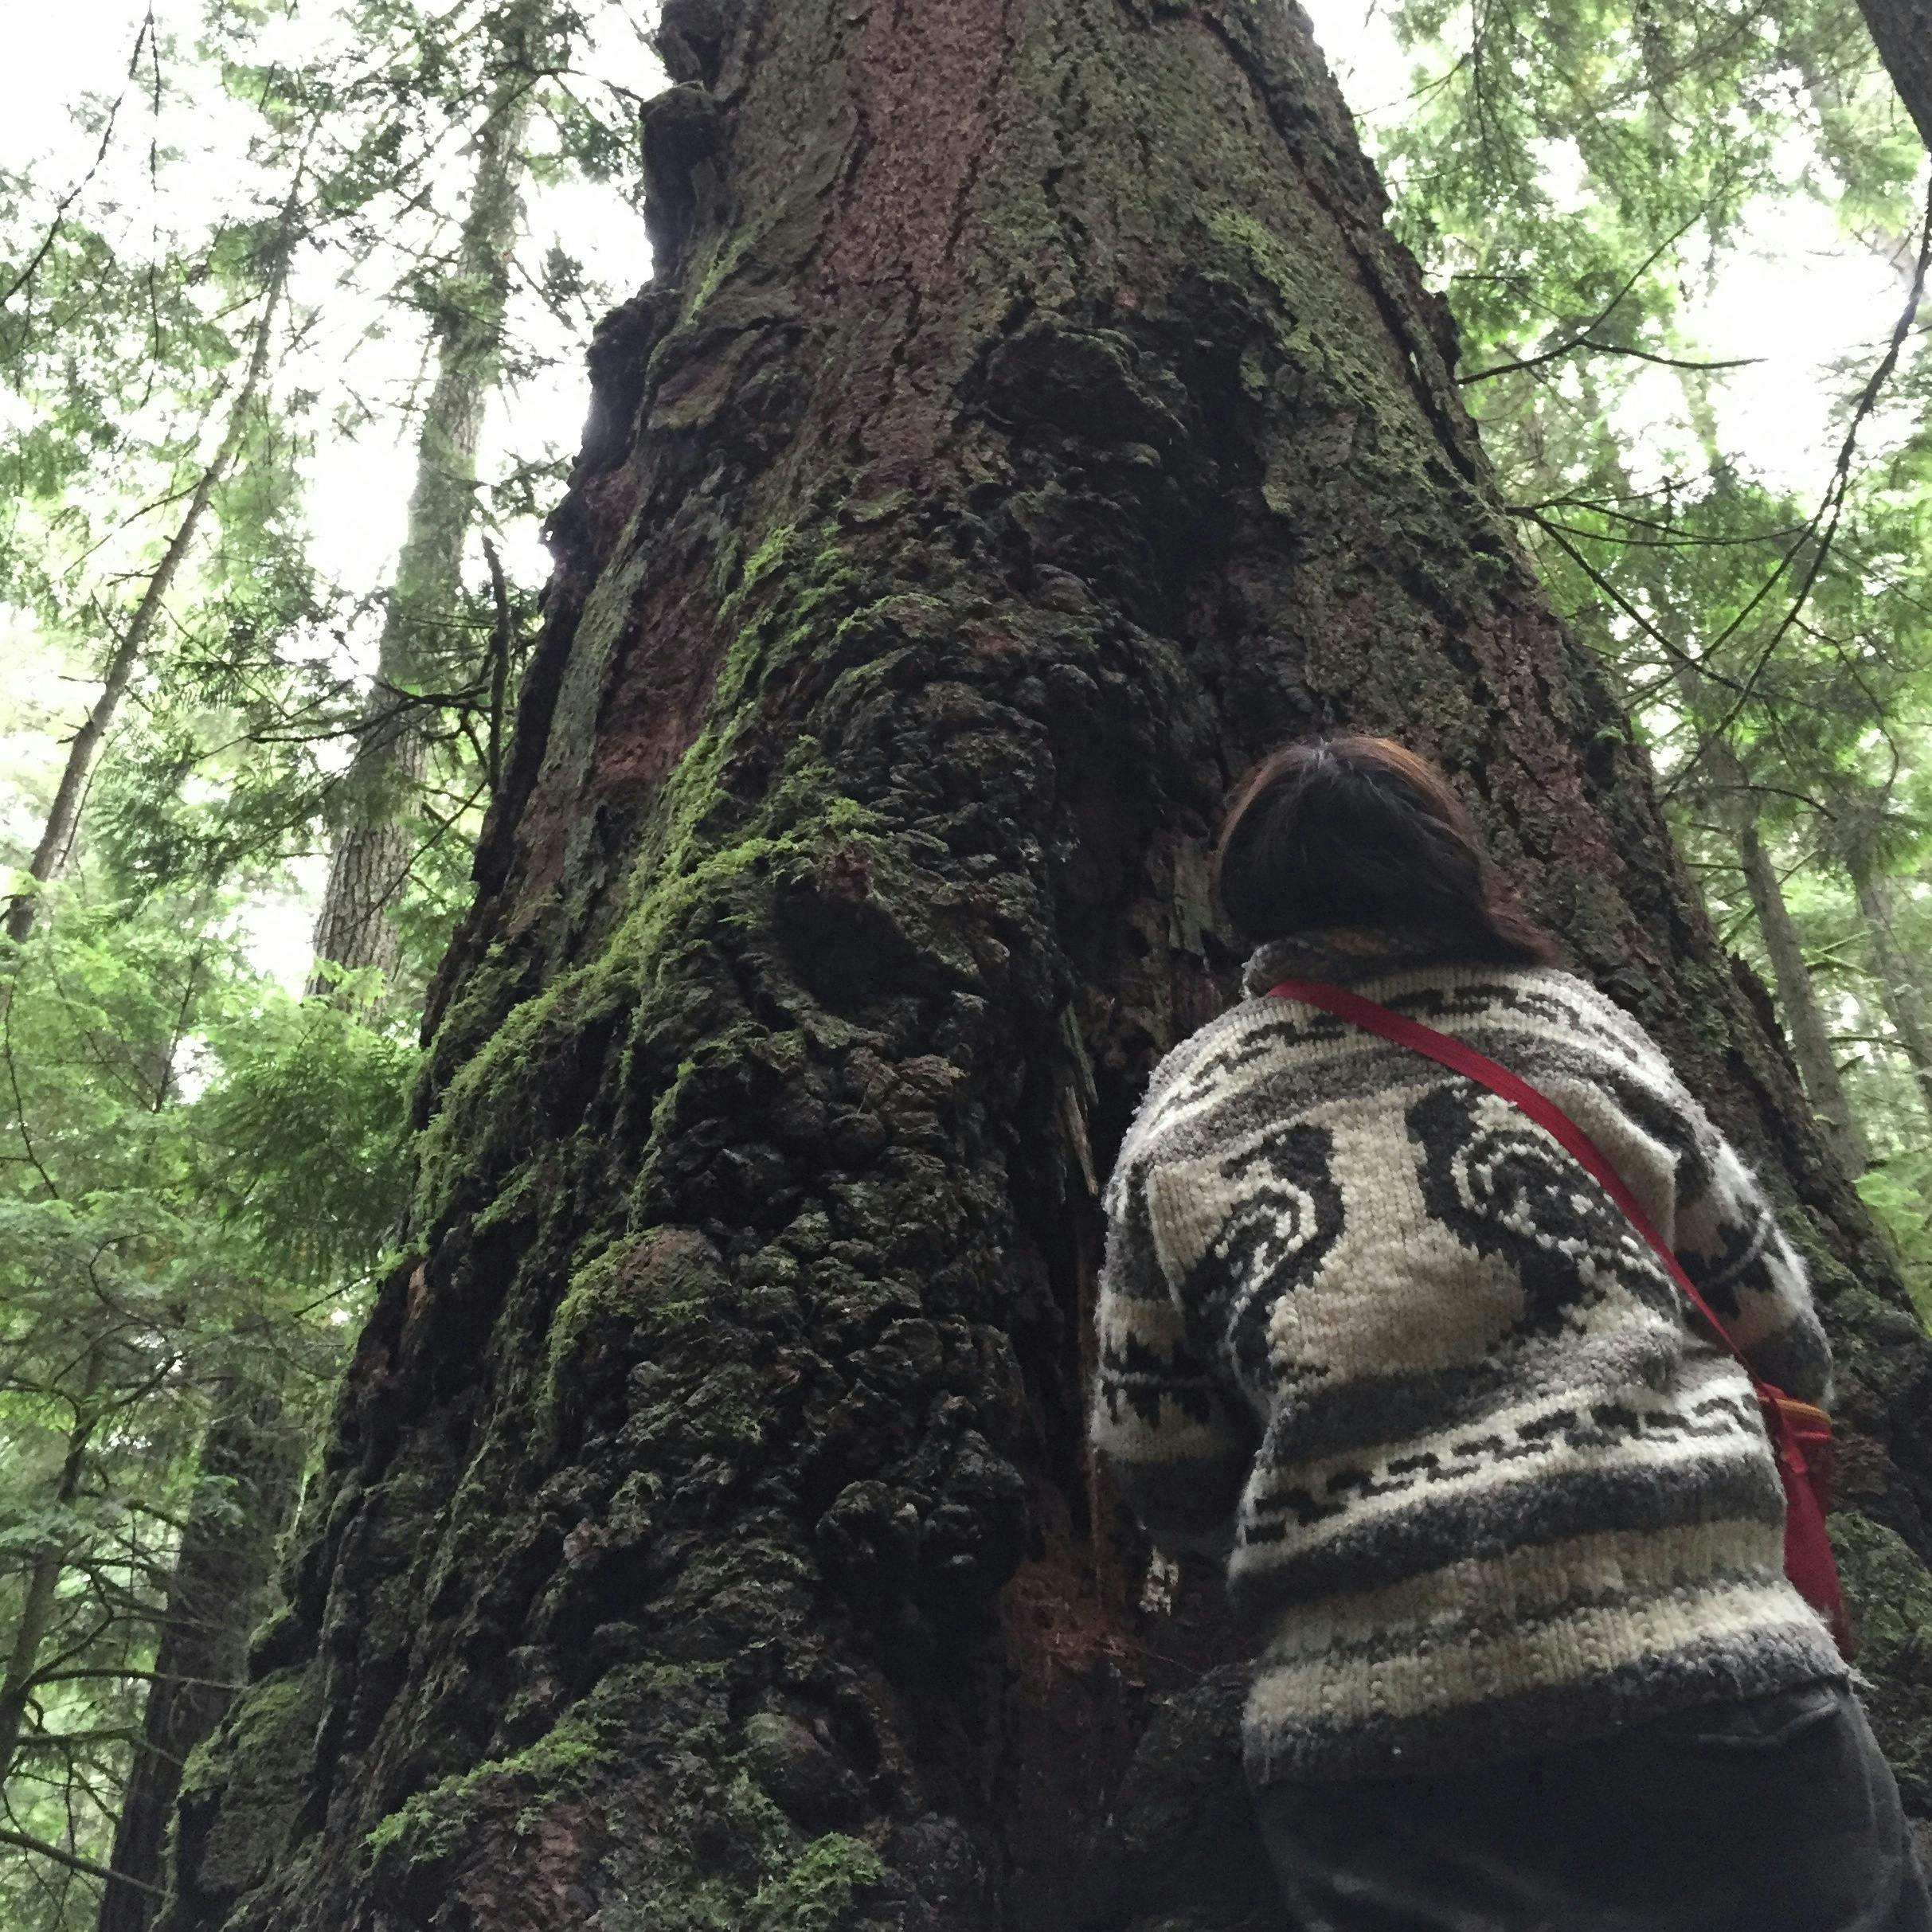 A woman in a Cowichan sweater gazes up at a large tree.